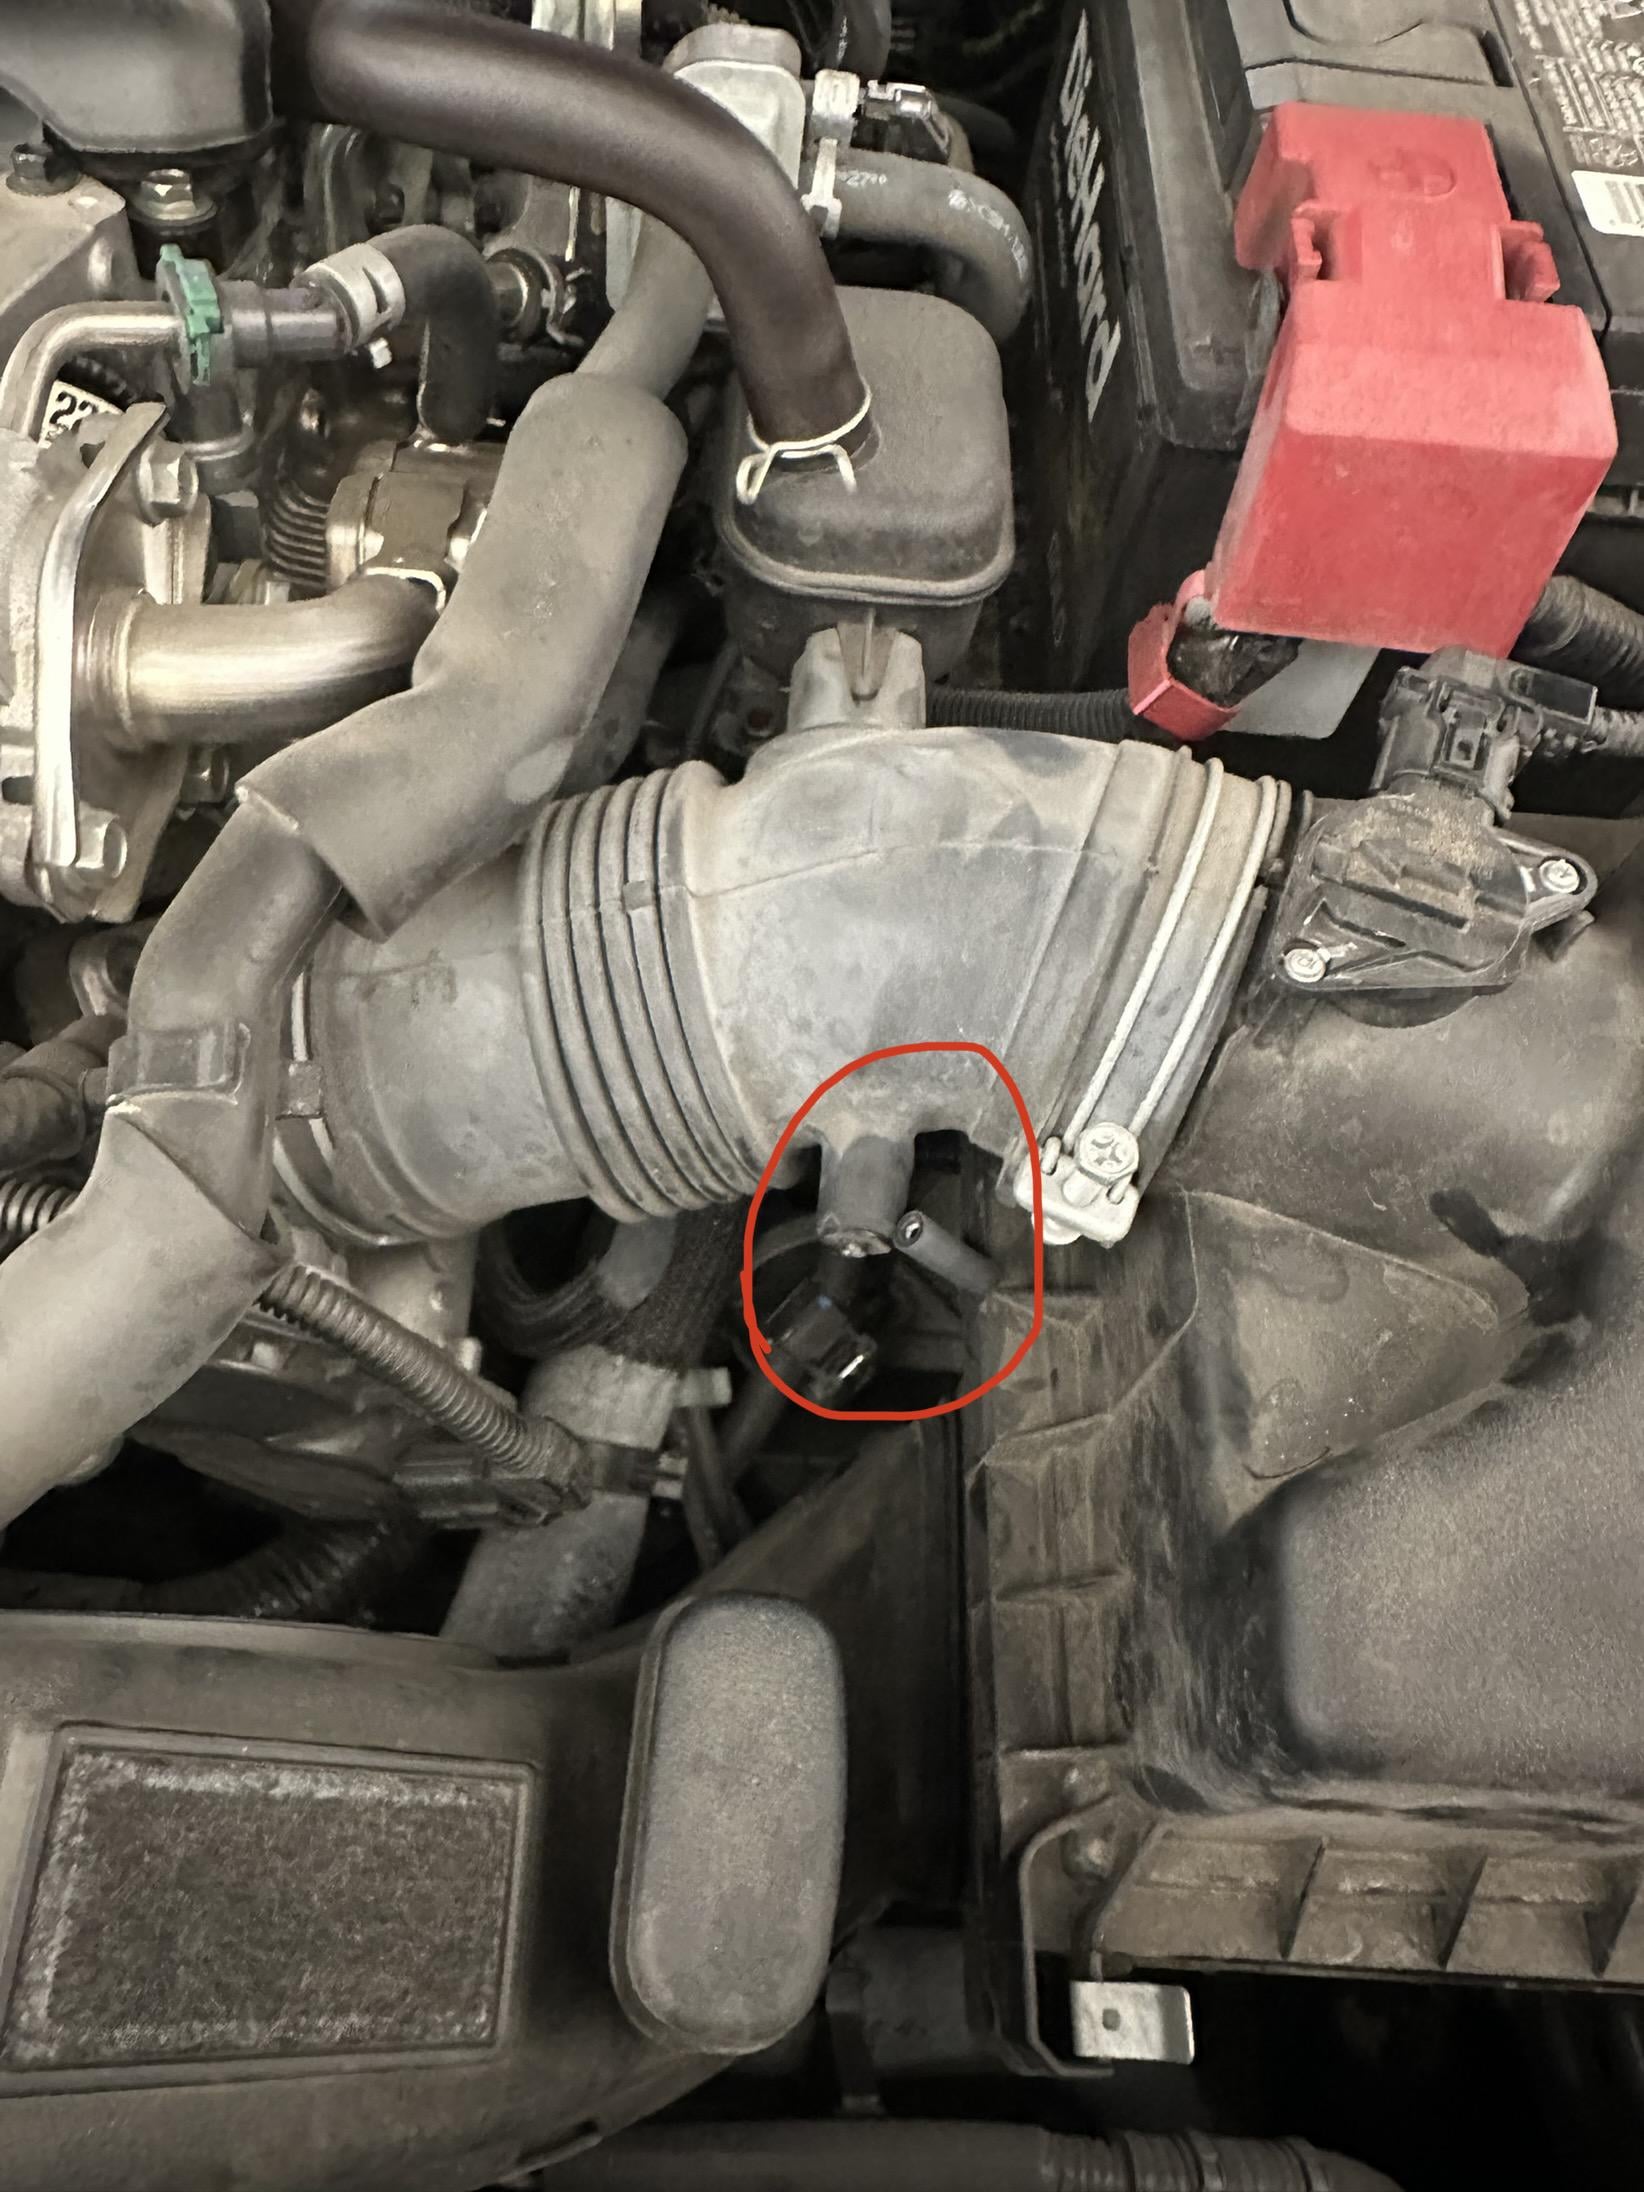 What Is The Hose Connected To The Air Intake